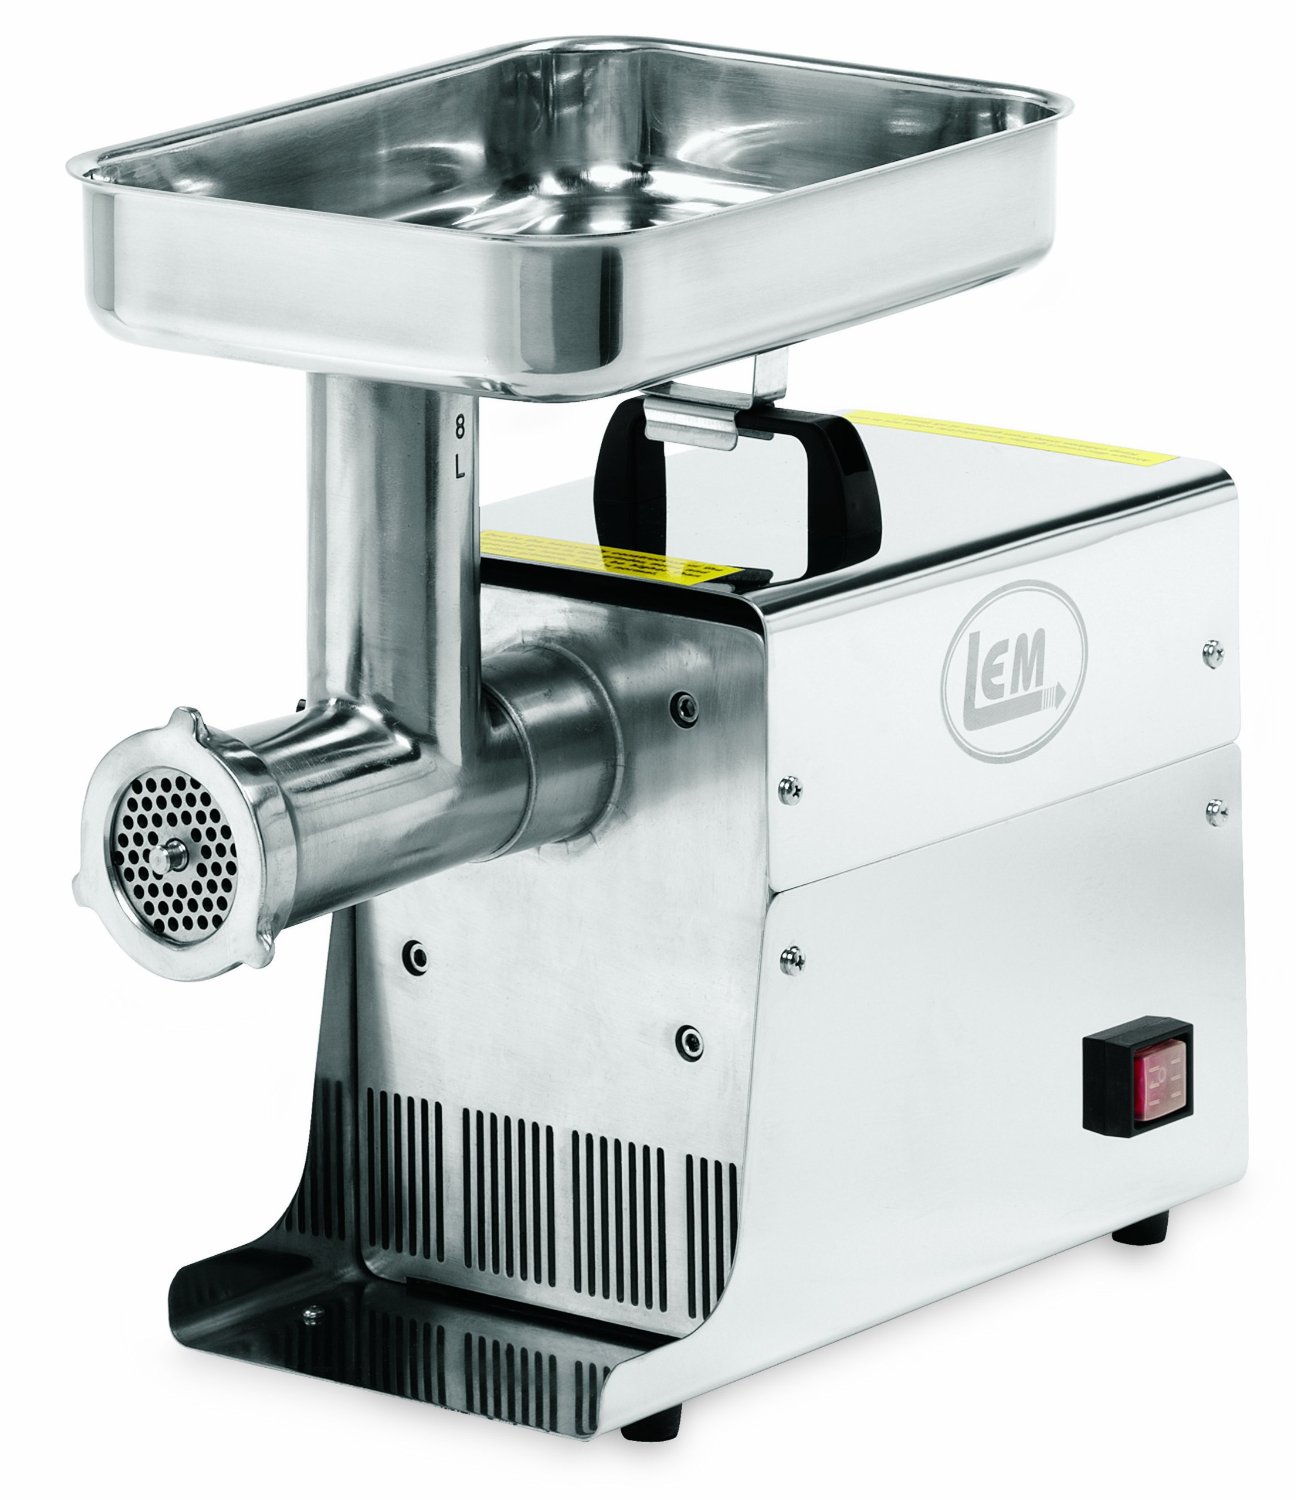 LEM #8 .35HP Stainless Steel Electric Meat Grinder W779 | eBay Lem Stainless Steel Meat Grinder